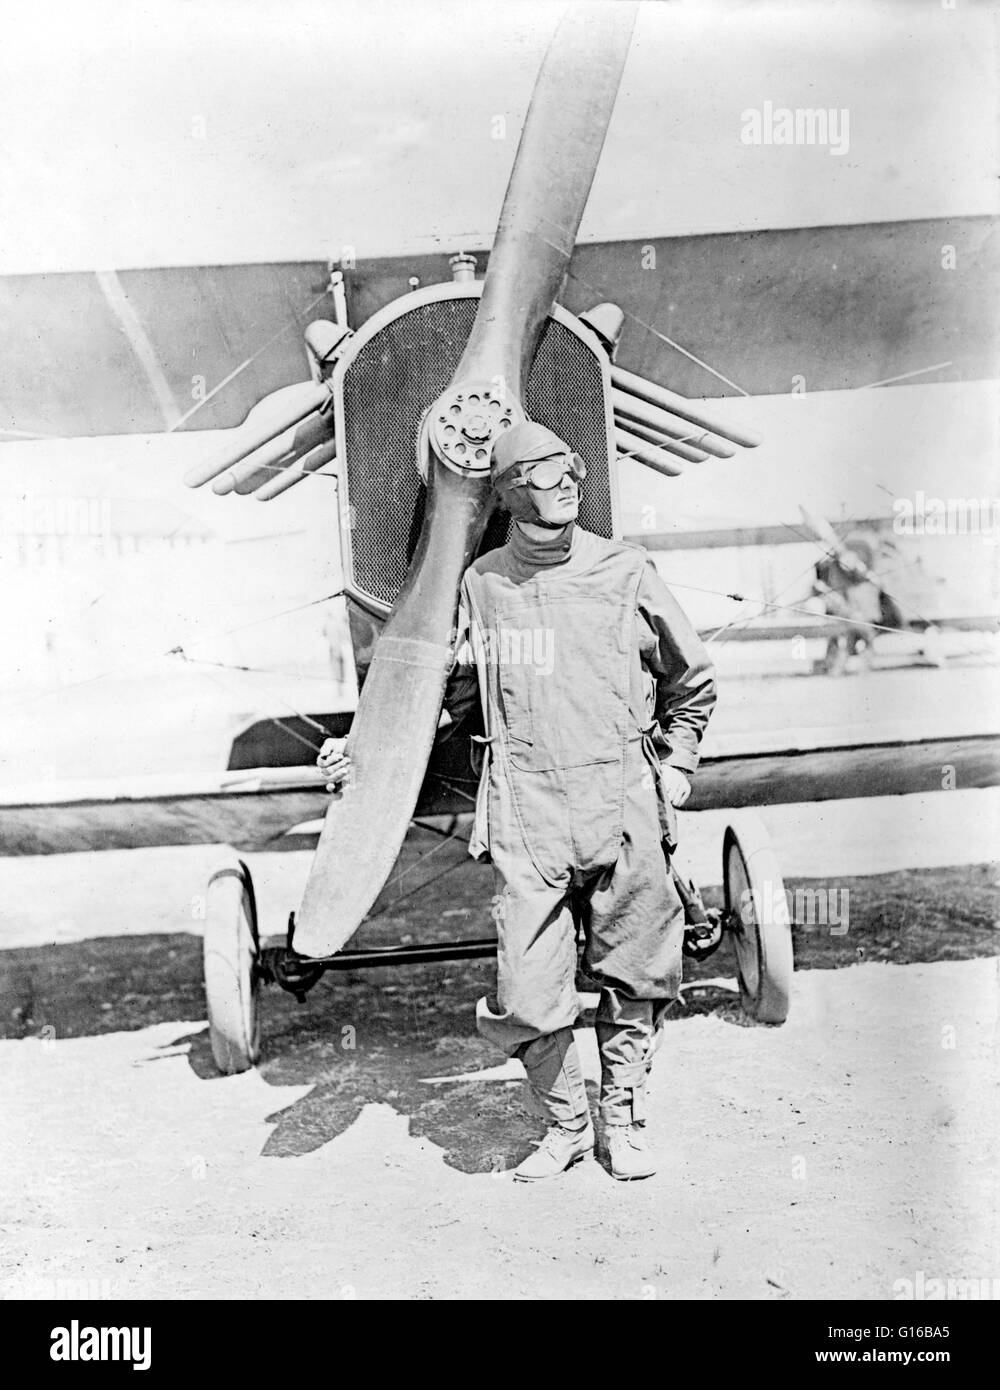 Unidentified pilot standing in front of U.S. Army airplane during World War I, 1918. The Air Service, United States Army, was a forerunner of the United States Air Force during and after World War I. In France, the Air Service of the American Expeditionar Stock Photo